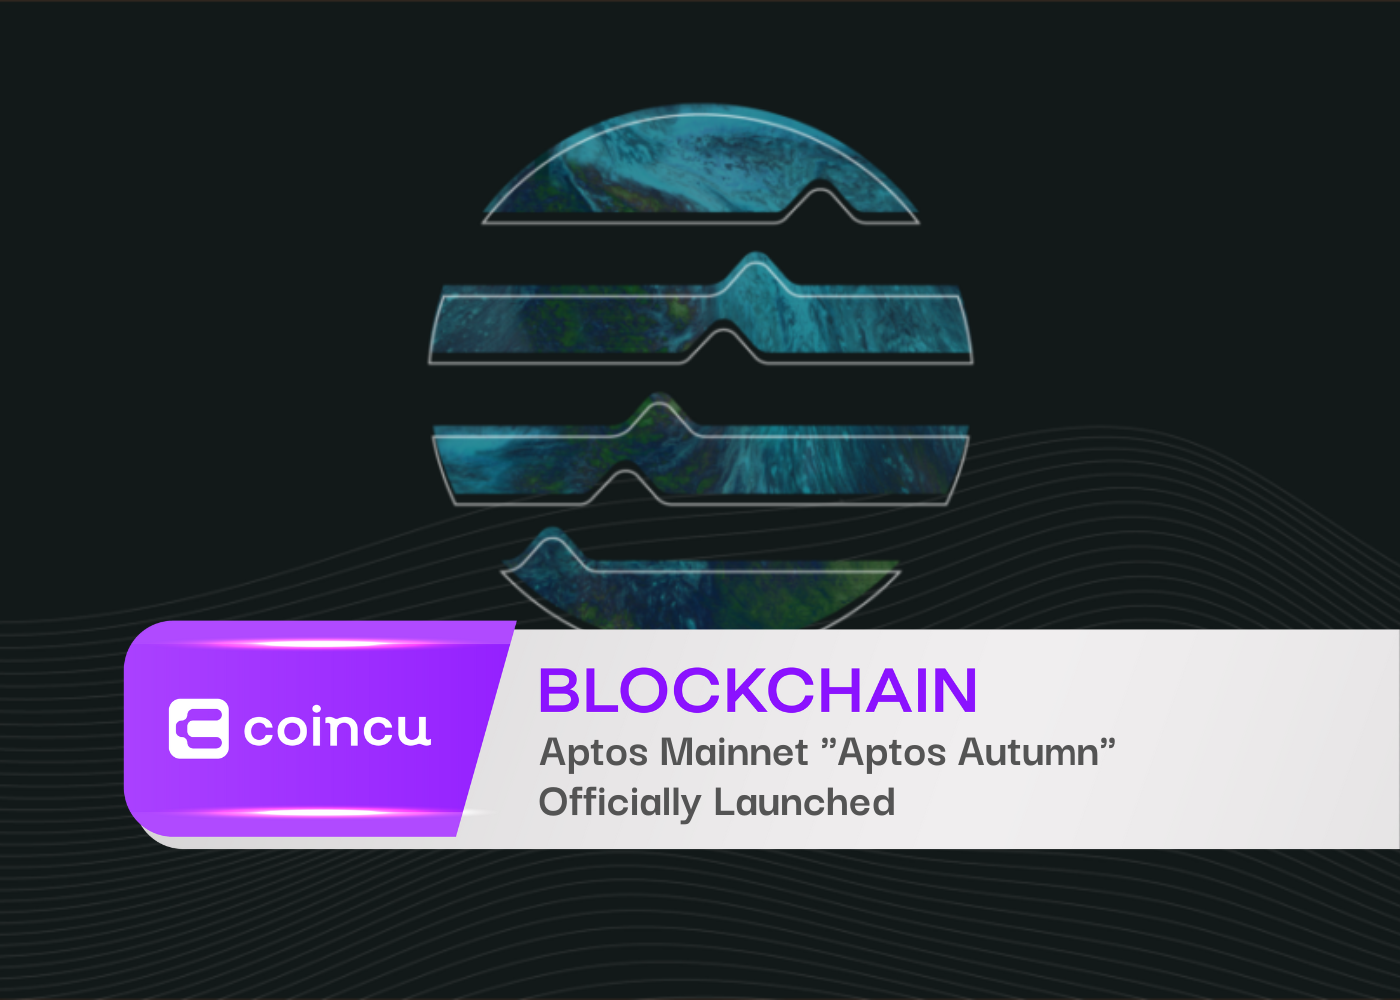 Aptos Mainnet "Aptos Autumn" Officially Launched After More Than 4 Years Of Deployment